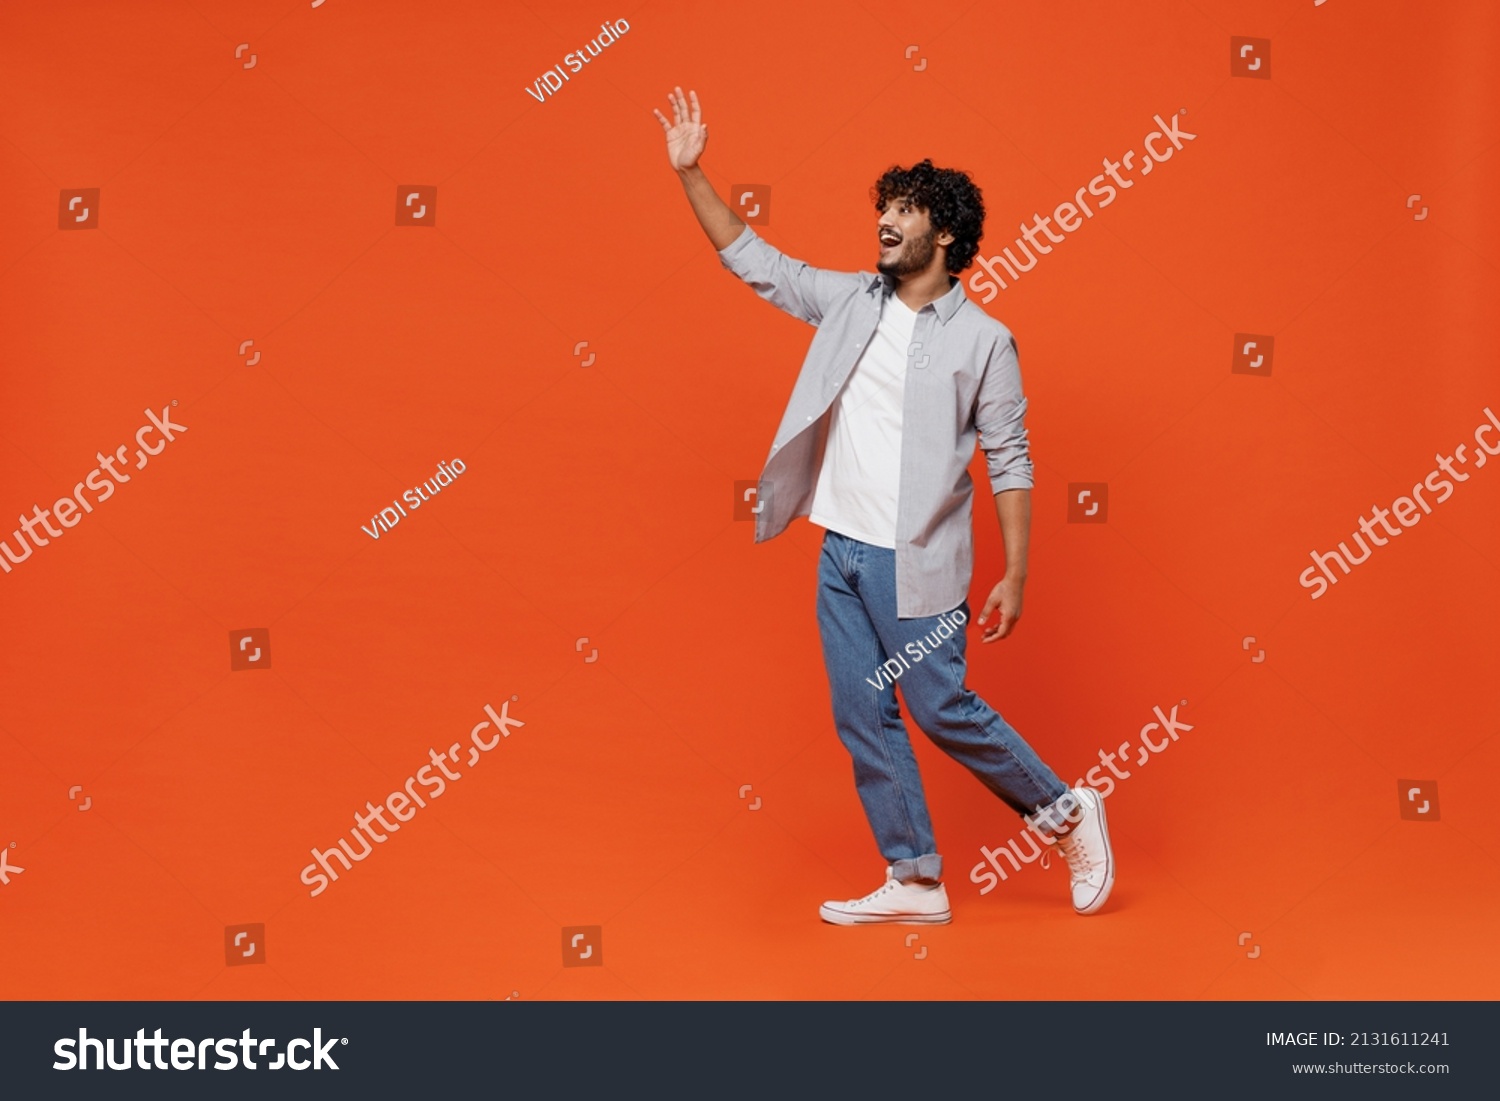 Full size body length side profile view cheerful young bearded Indian man 20s years old wears blue shirt meet greet waving hand as notices someone isolated on plain orange background studio portrait #2131611241